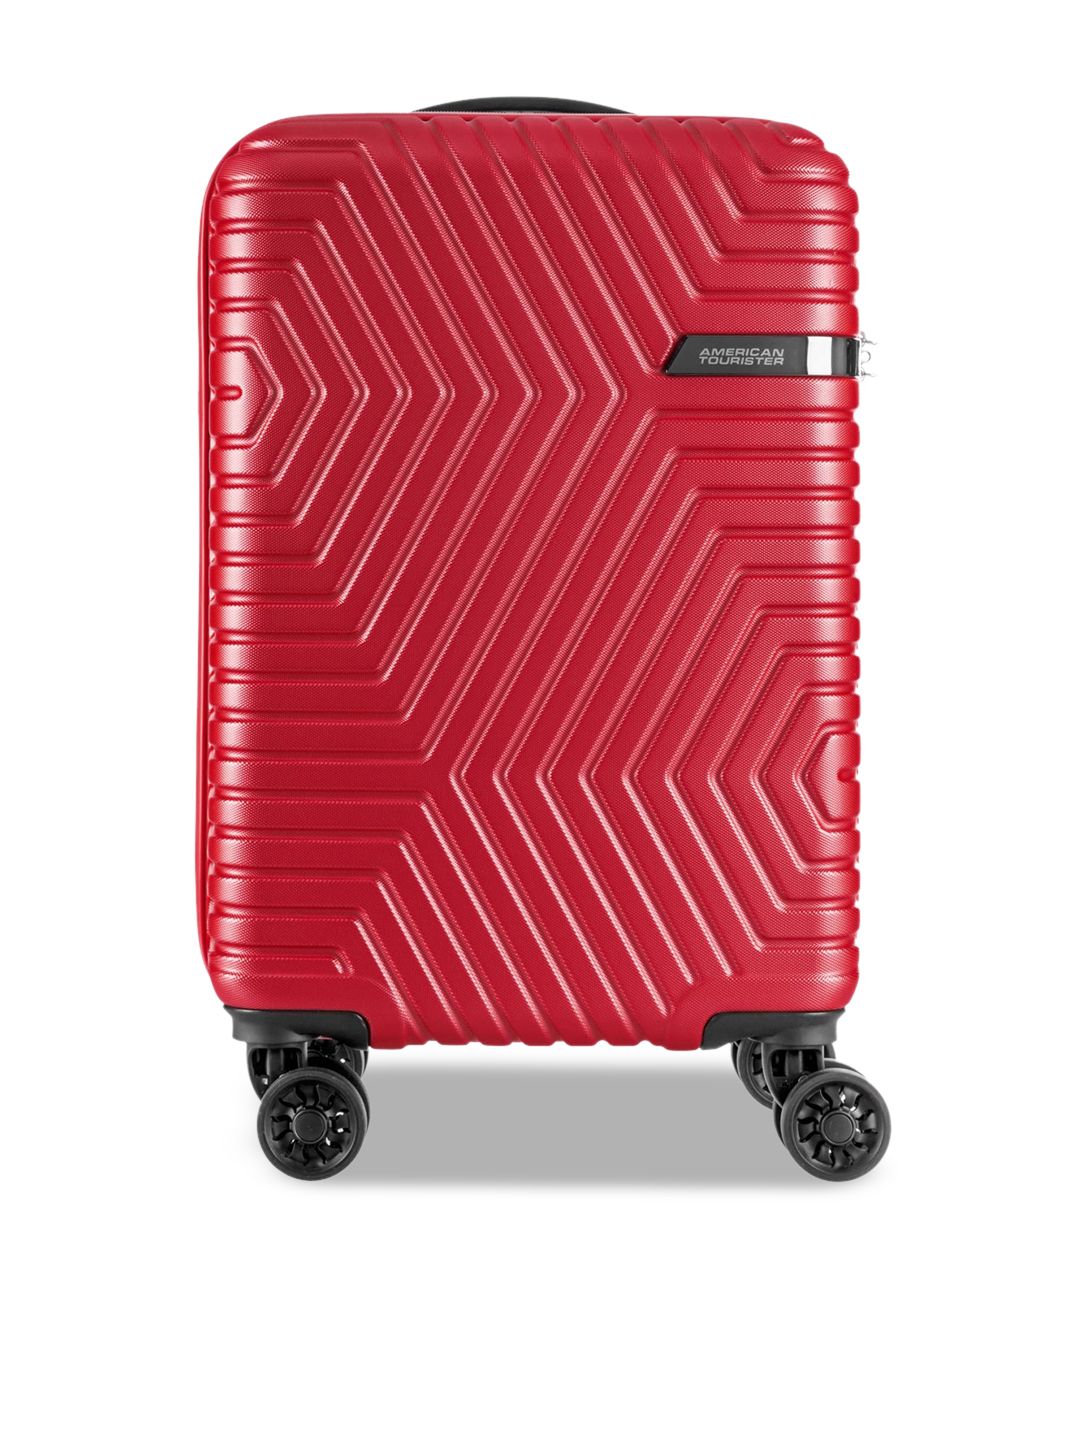 AMERICAN TOURISTER Unisex Red Textured Soft-Sided Trolley Suitcase Price in India